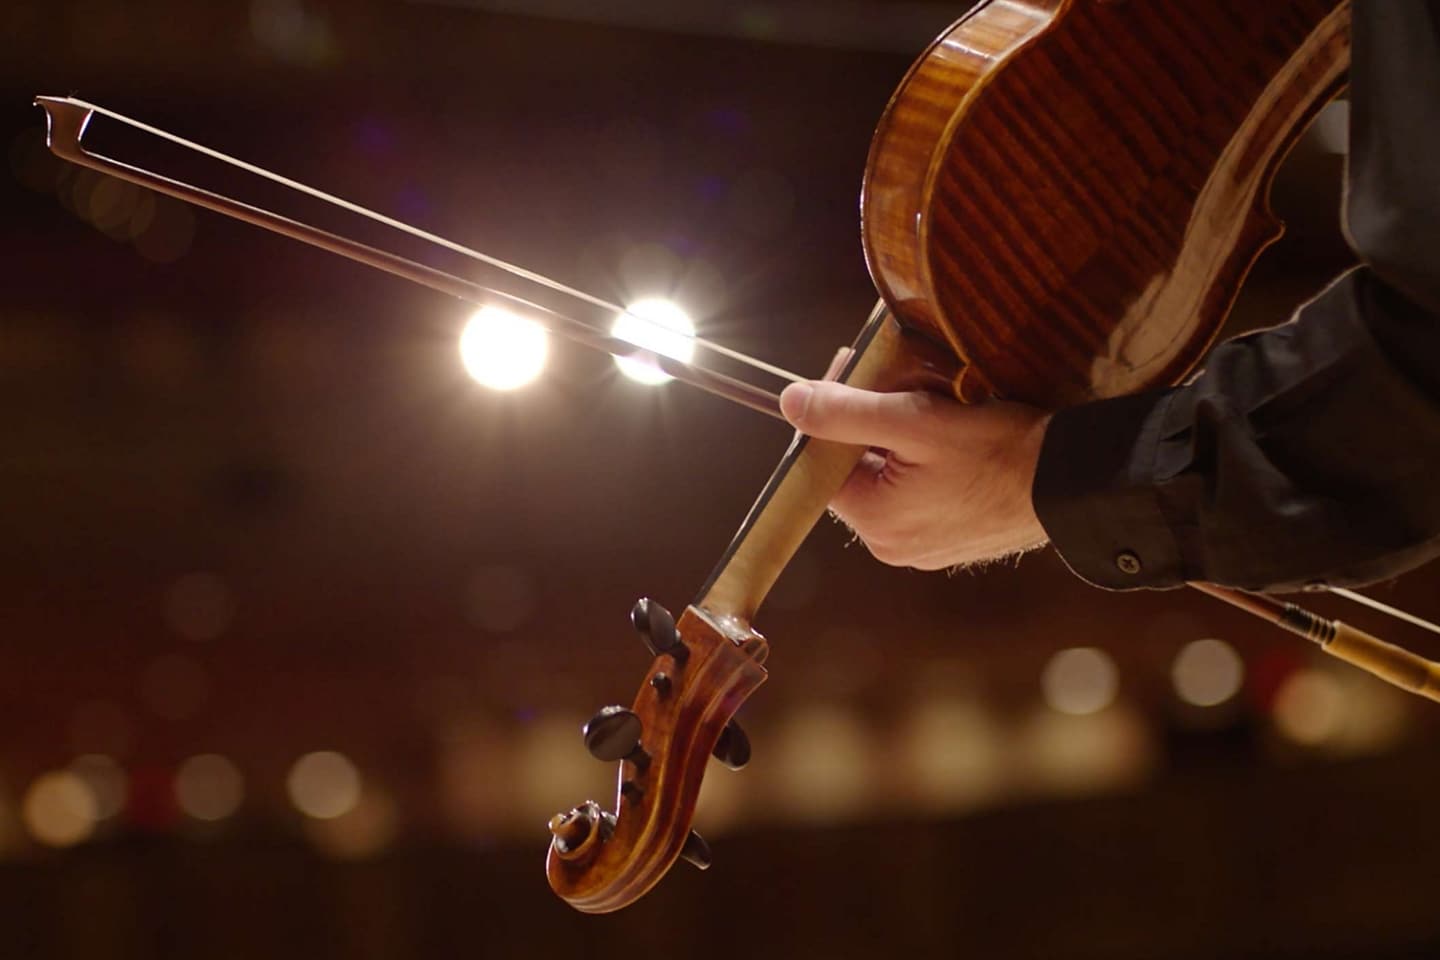 The bow of a musician’s violin slides across stage spotlights to illustrate the dramatic sound of the symphonic chimes